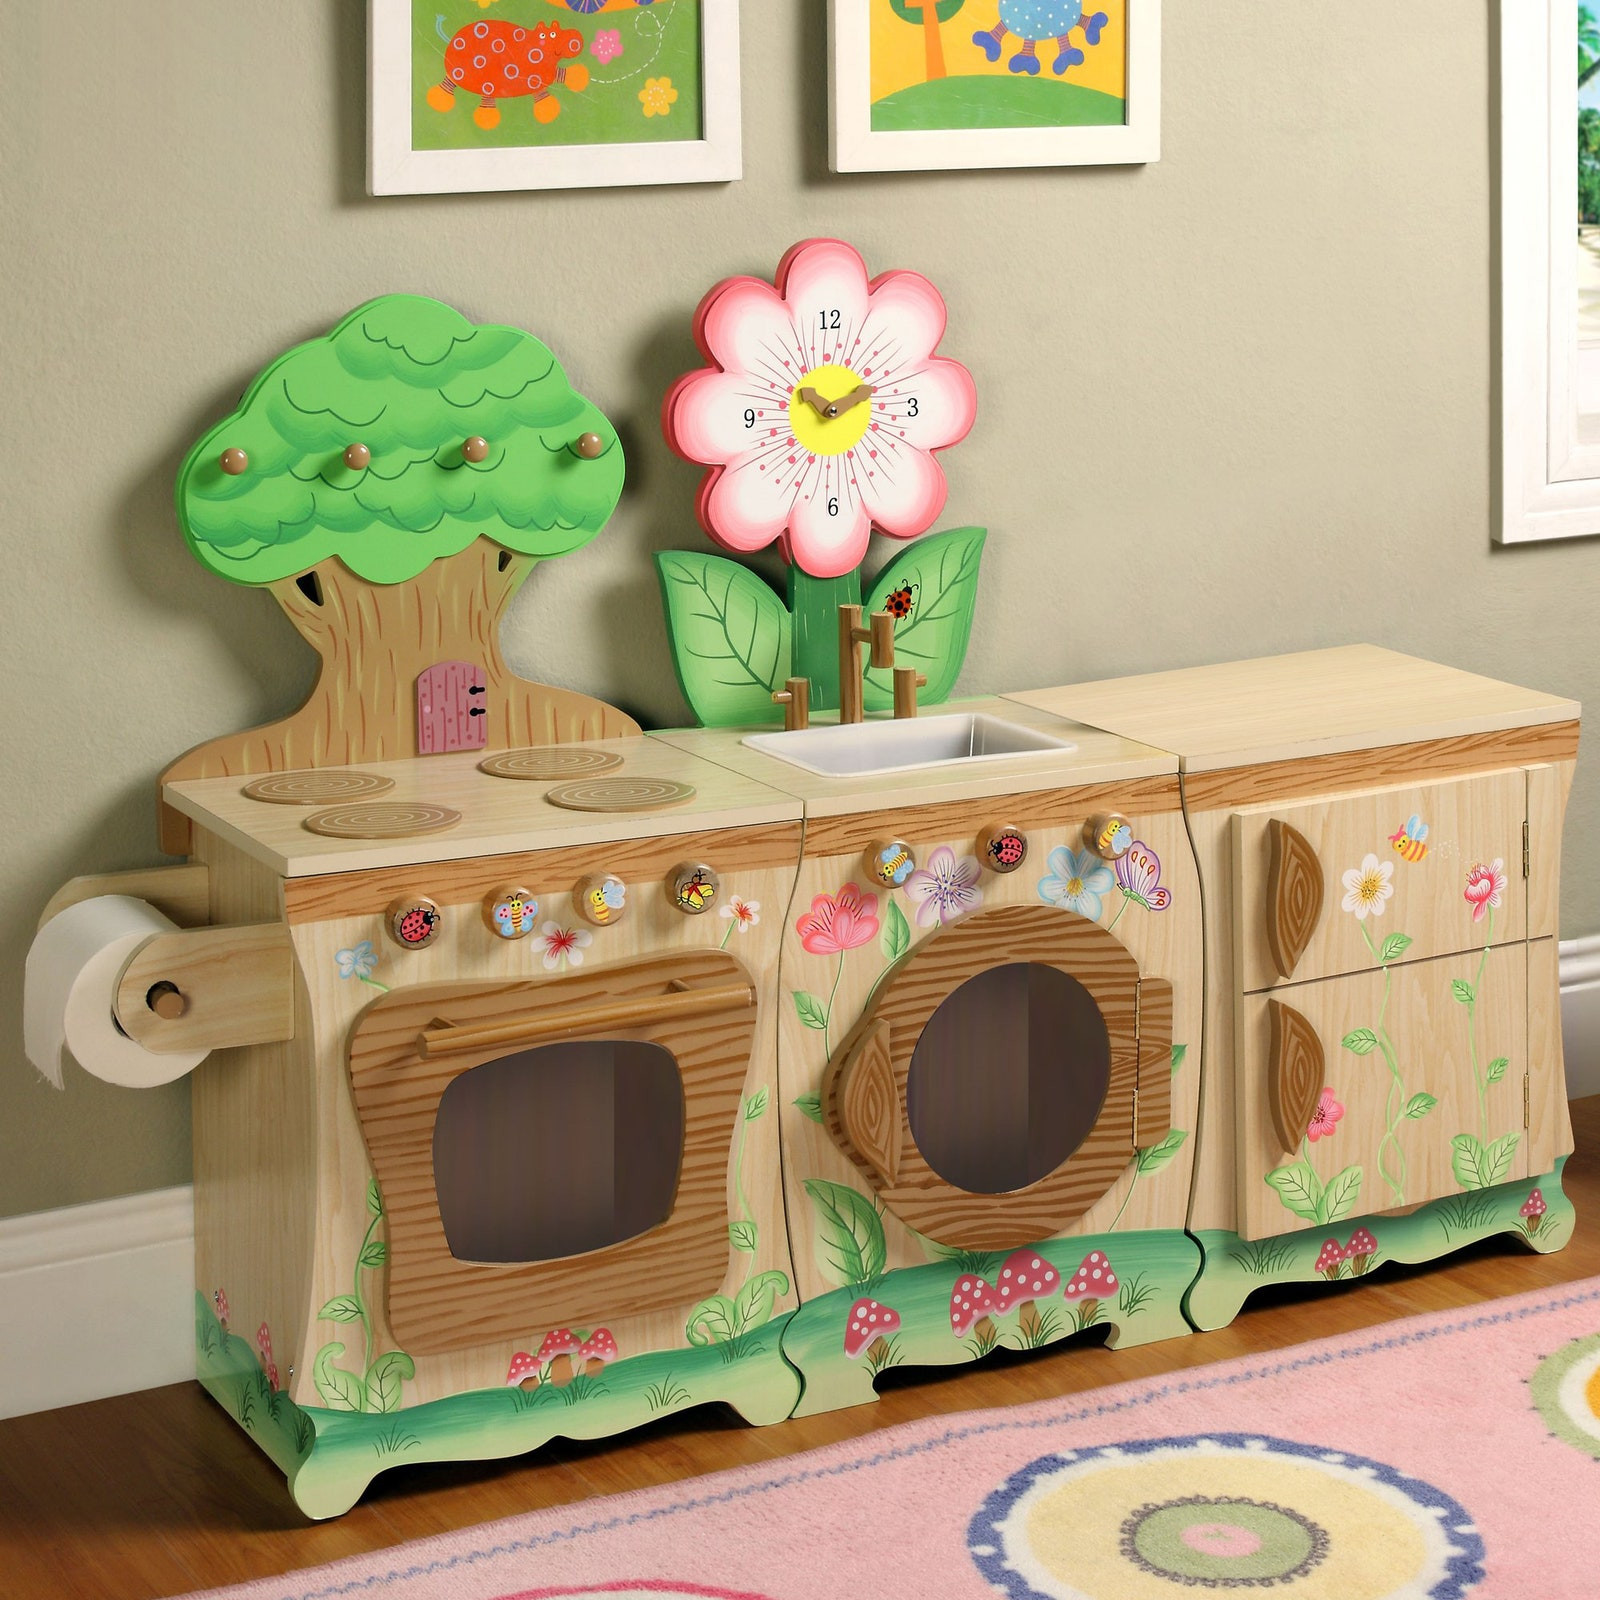 Small Play Kitchen Set
 13 Impressive Play Kitchen Sets for Kids and Adults